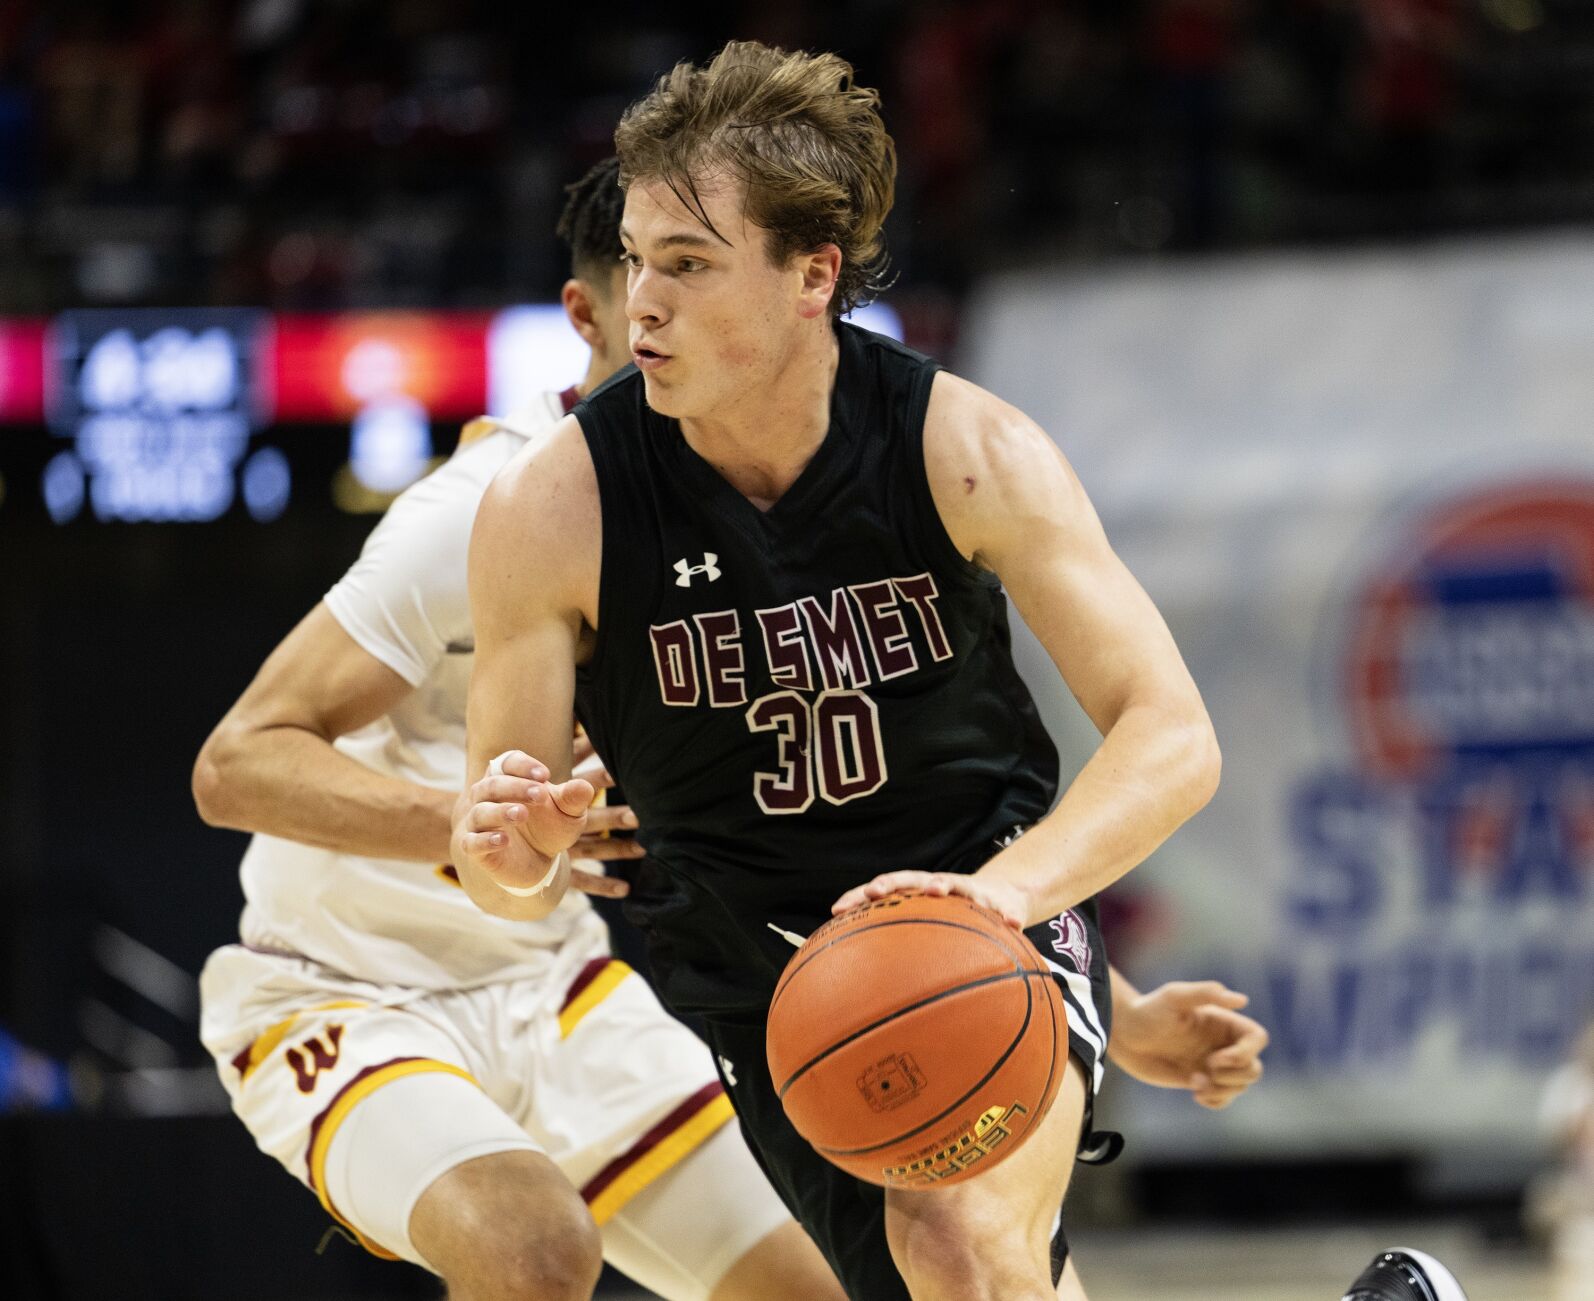 Dillon Duff dominates early as De Smet advances to Class 5 state title game